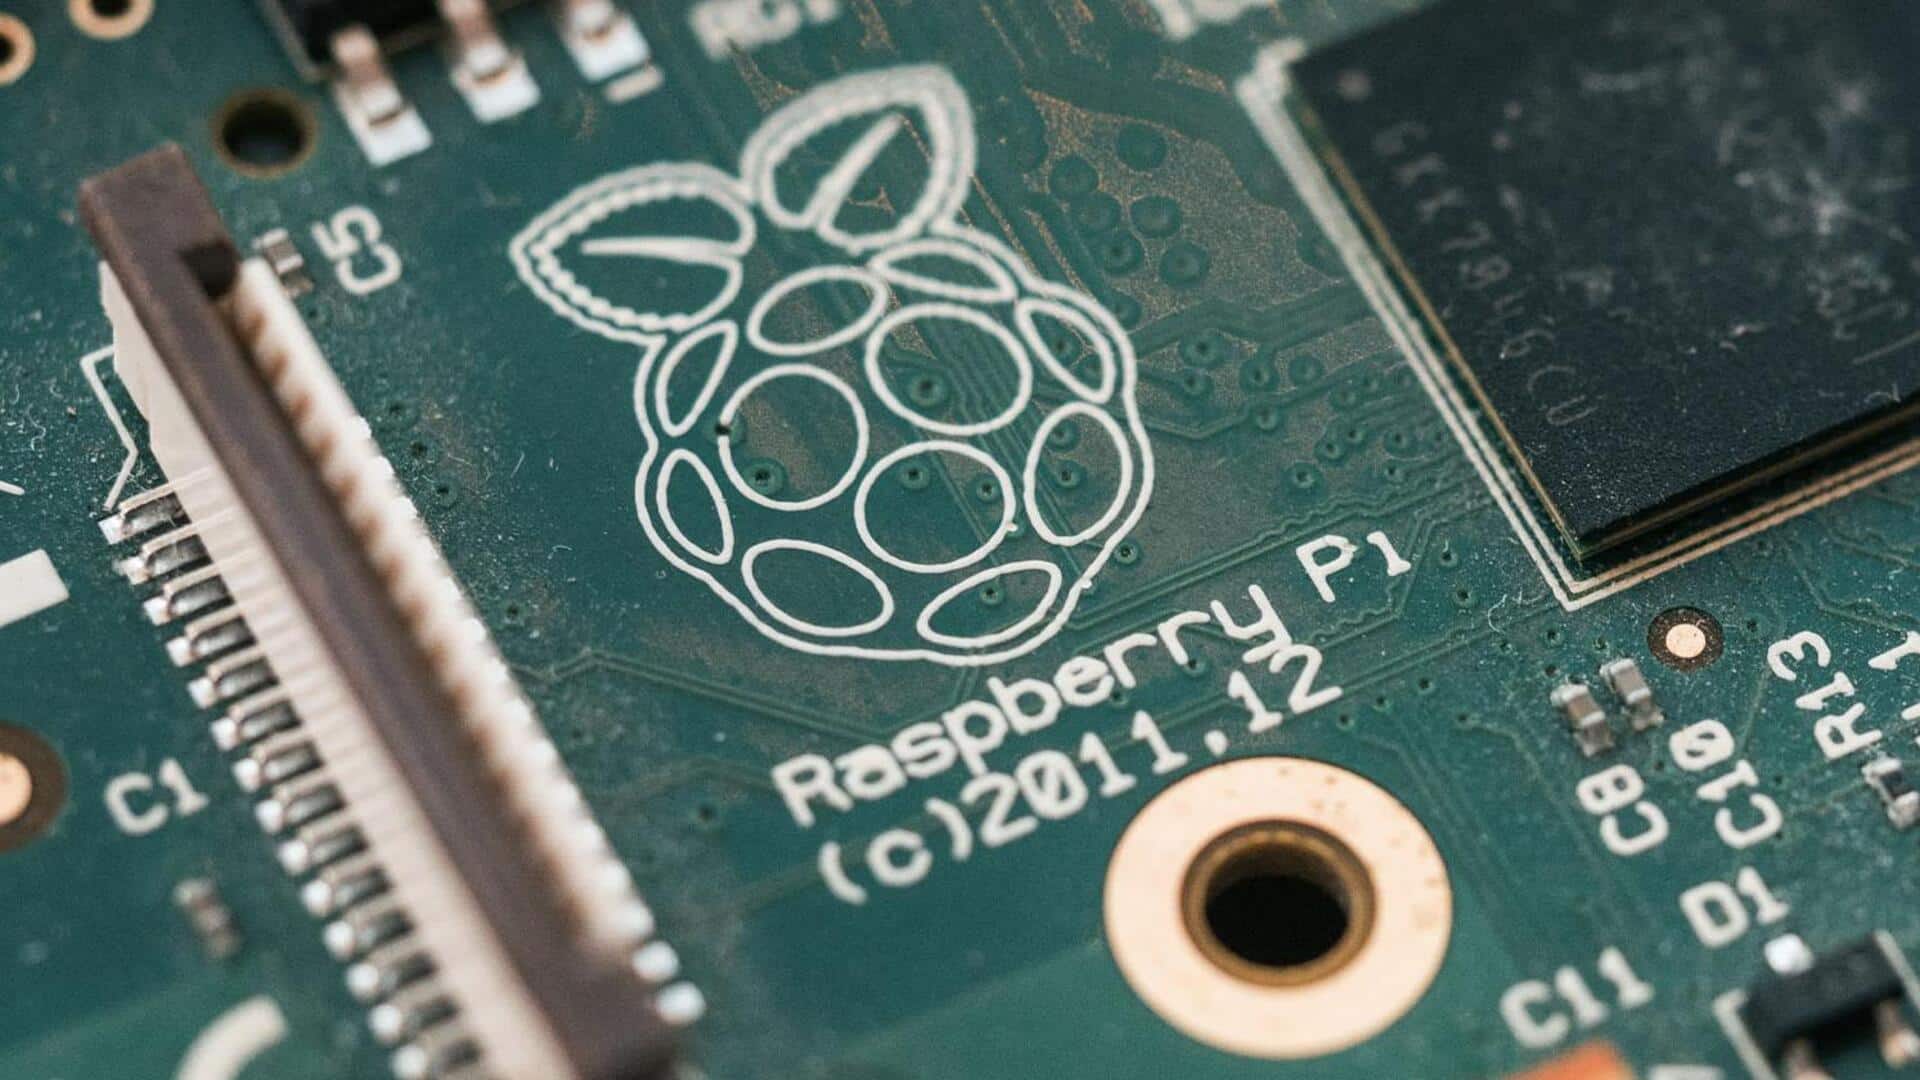 Raspberry Pi takes plunge into AI with new chip